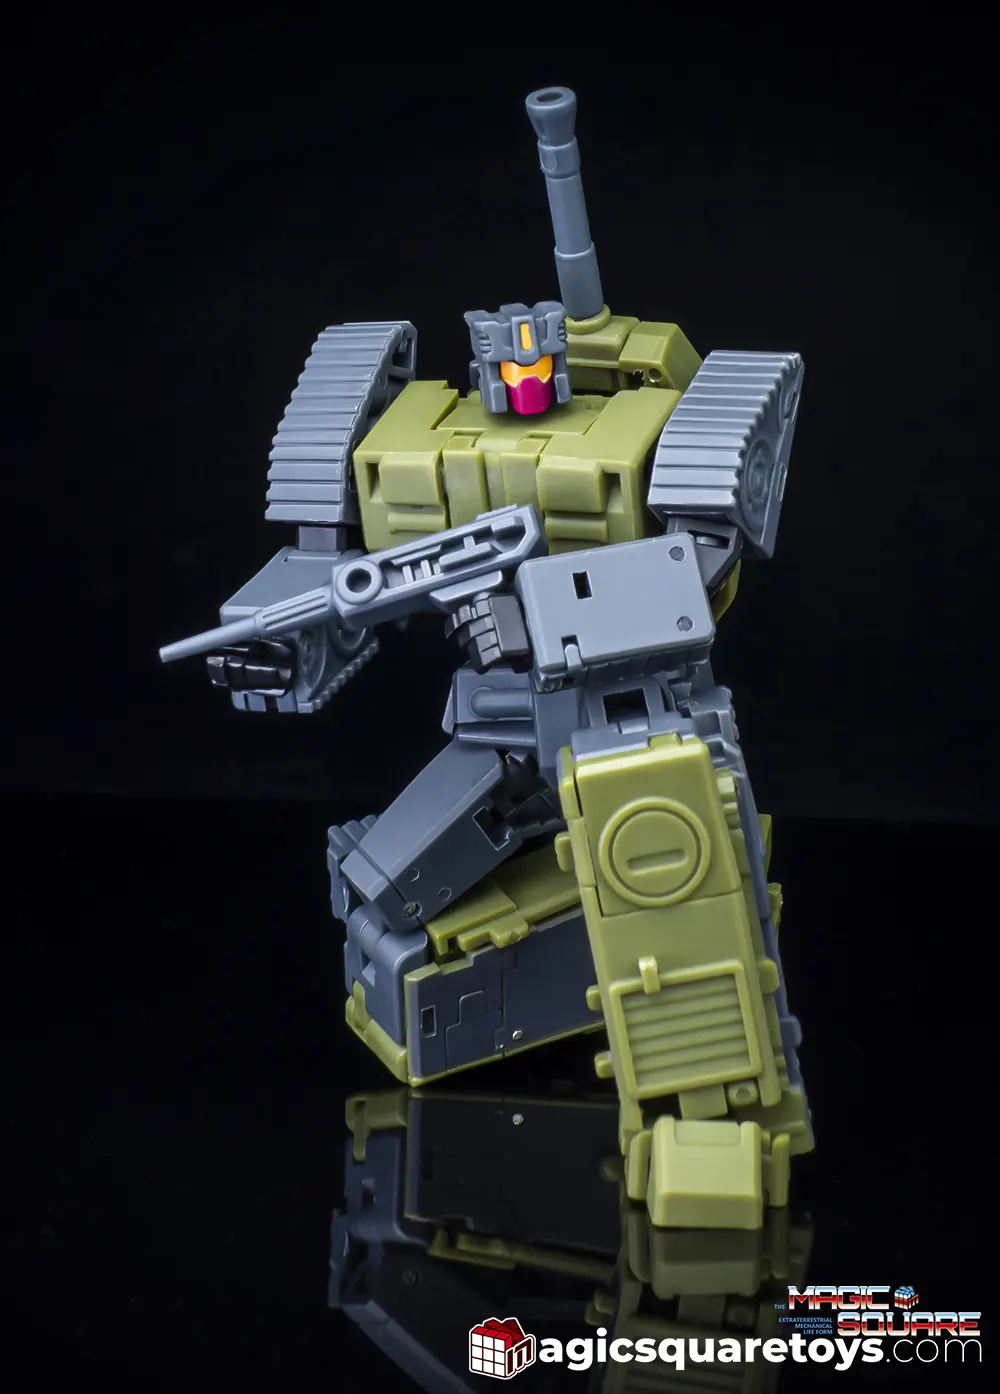 Magic Square Toys MS-B51 Heavy Gunner, Transformers Brawl homage, first member of Bruticus homage.